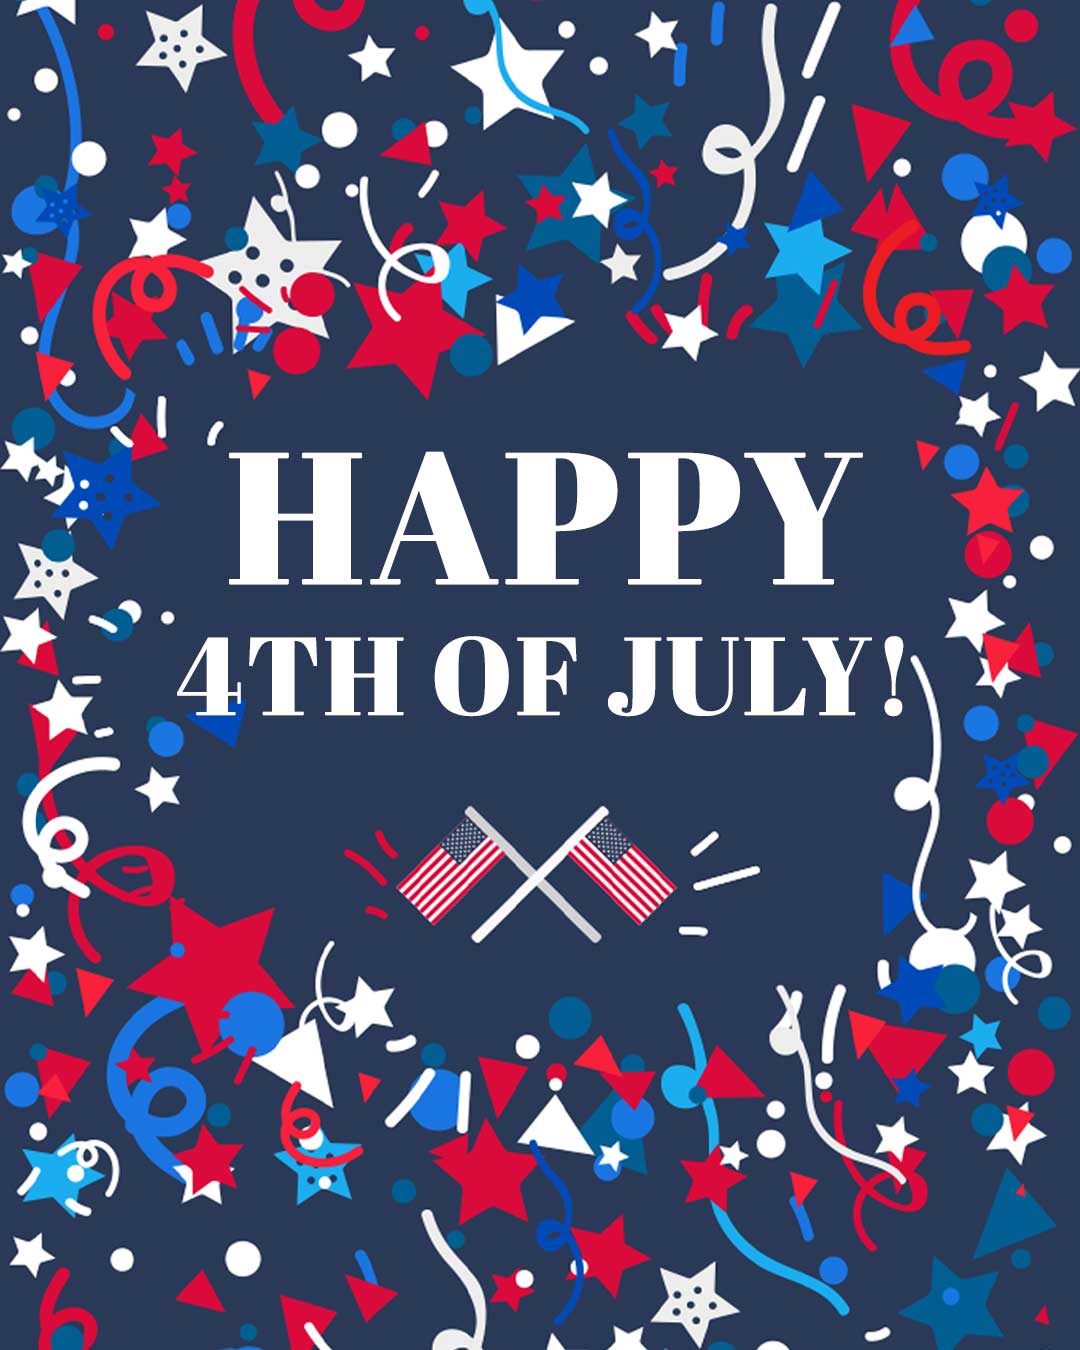 Happy 4th of July from Ellie Ray's RV Resort & Campground